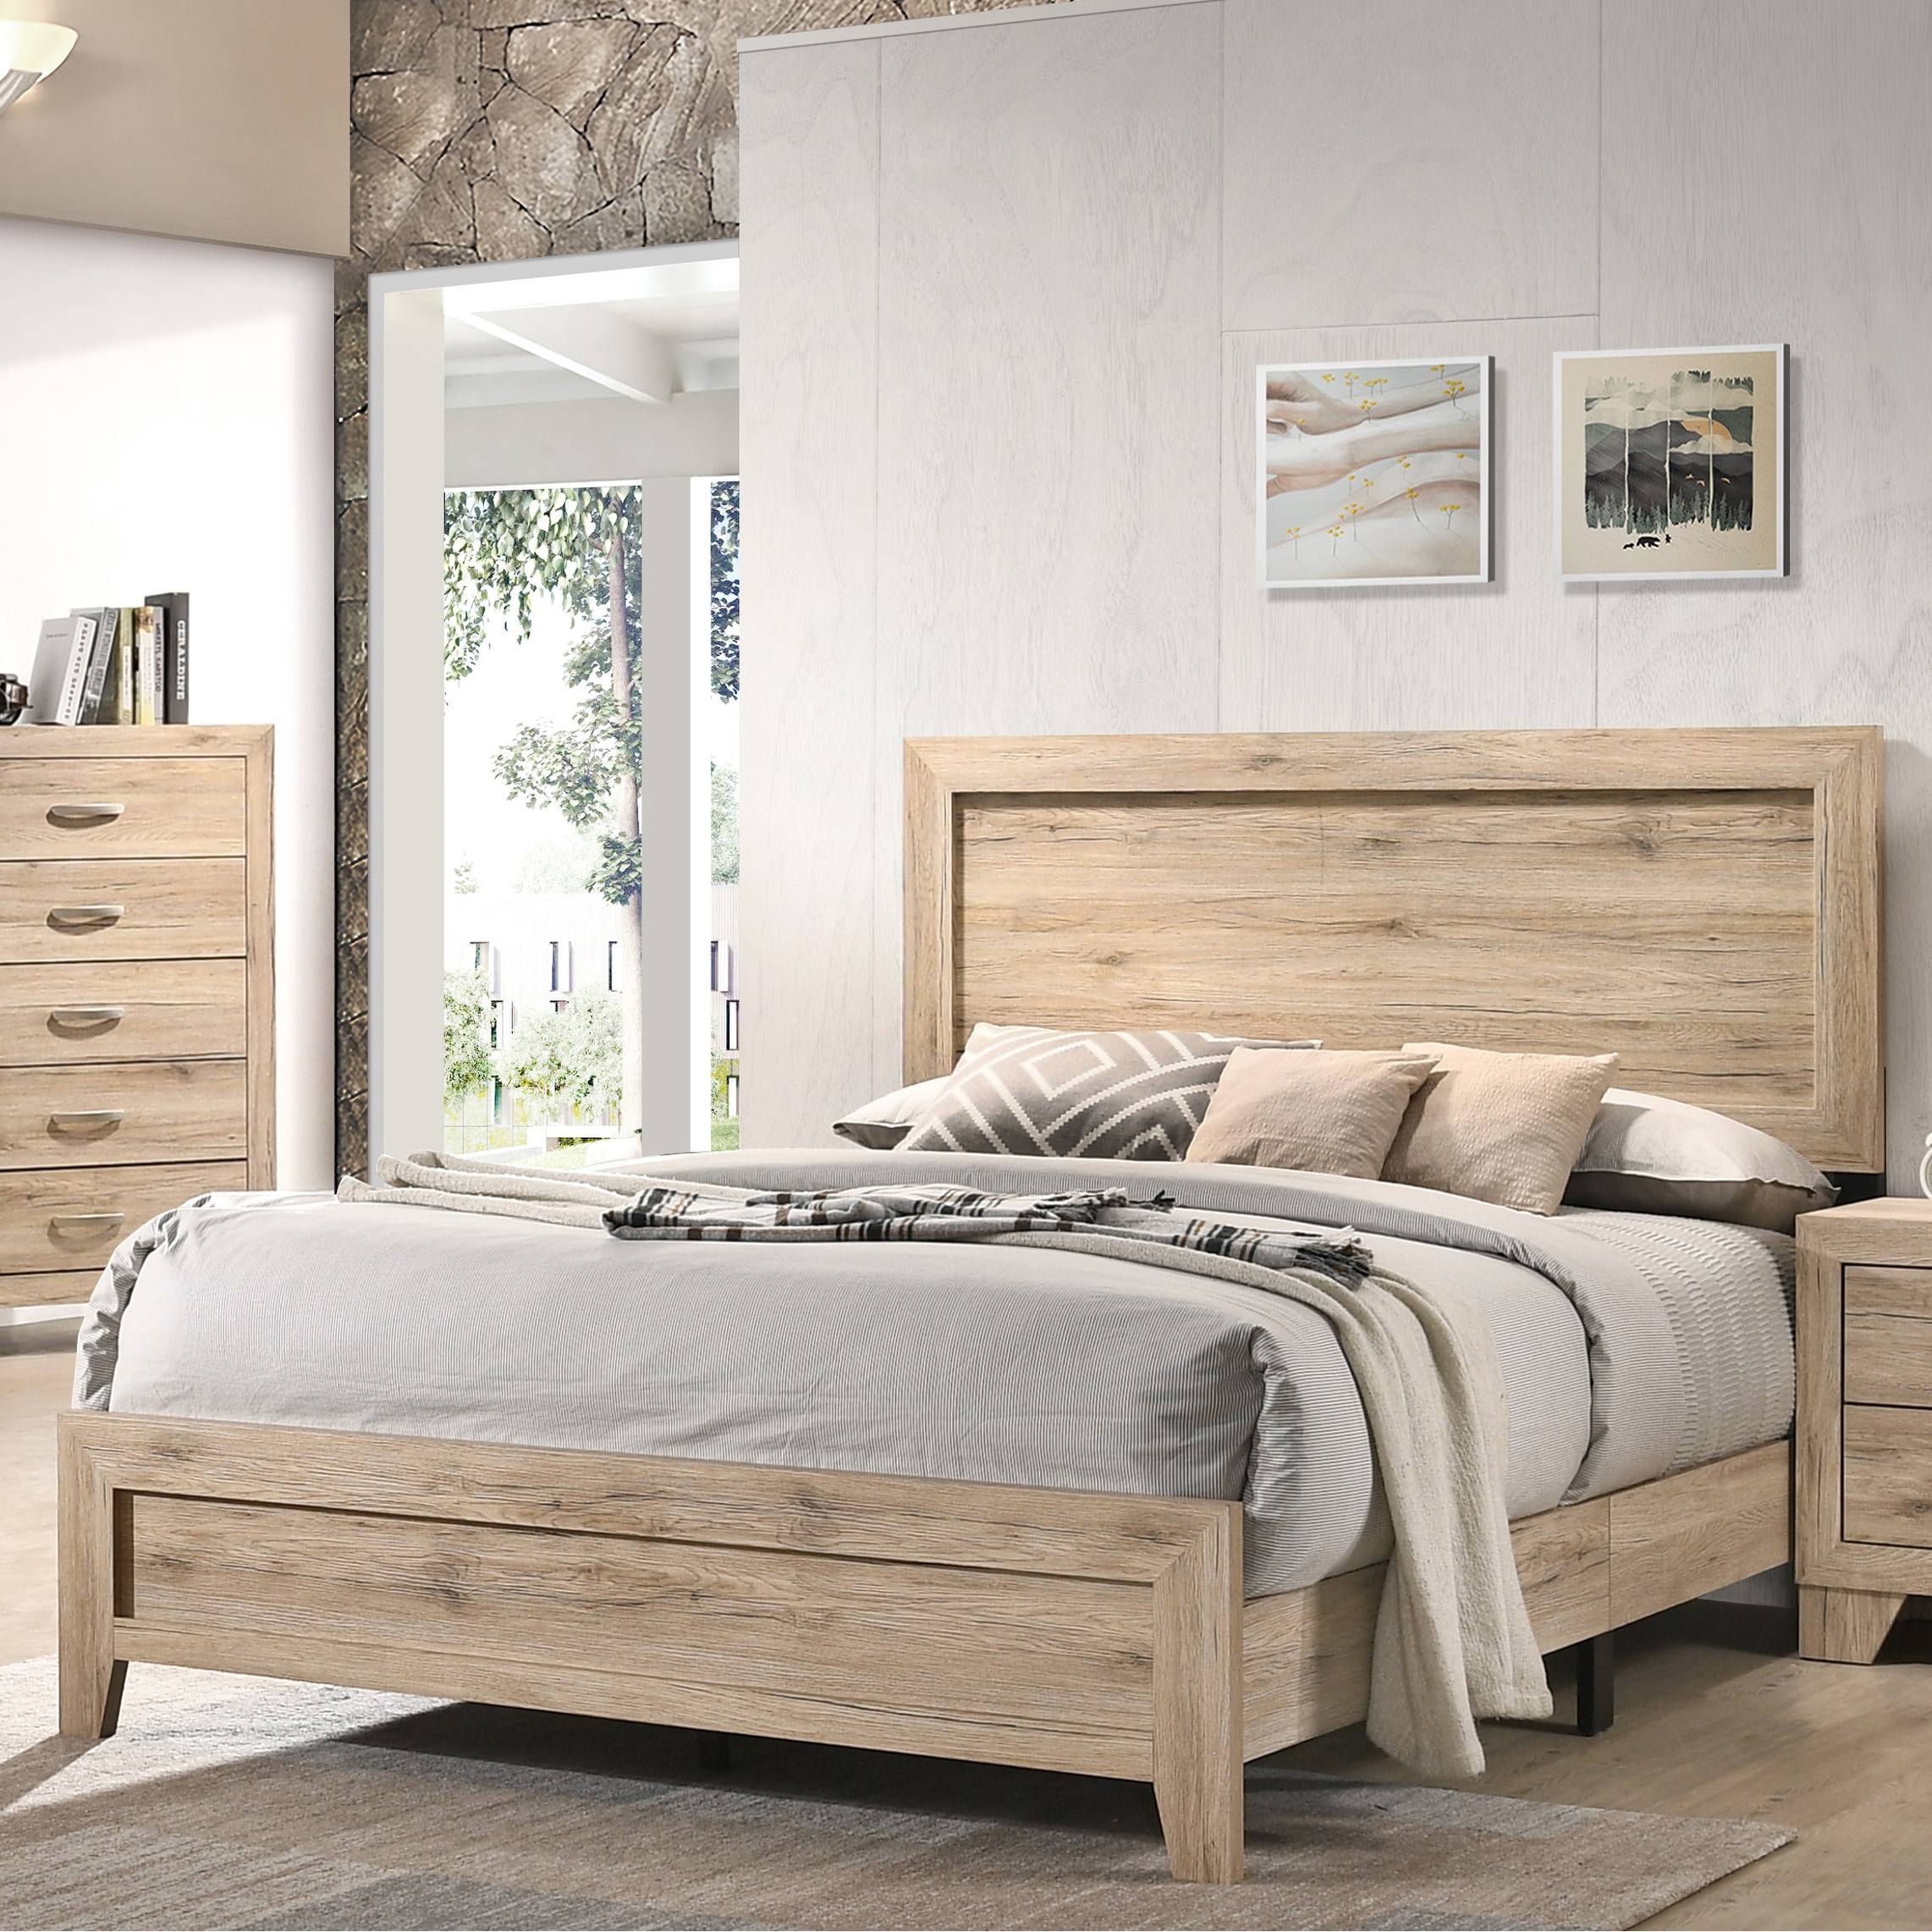 https://ak1.ostkcdn.com/images/products/is/images/direct/5b43733f13f735f6c92030dafff57872d4807123/The-Gray-Barn-Magnolia-Queen-Bed-in-Washed-Oak.jpg